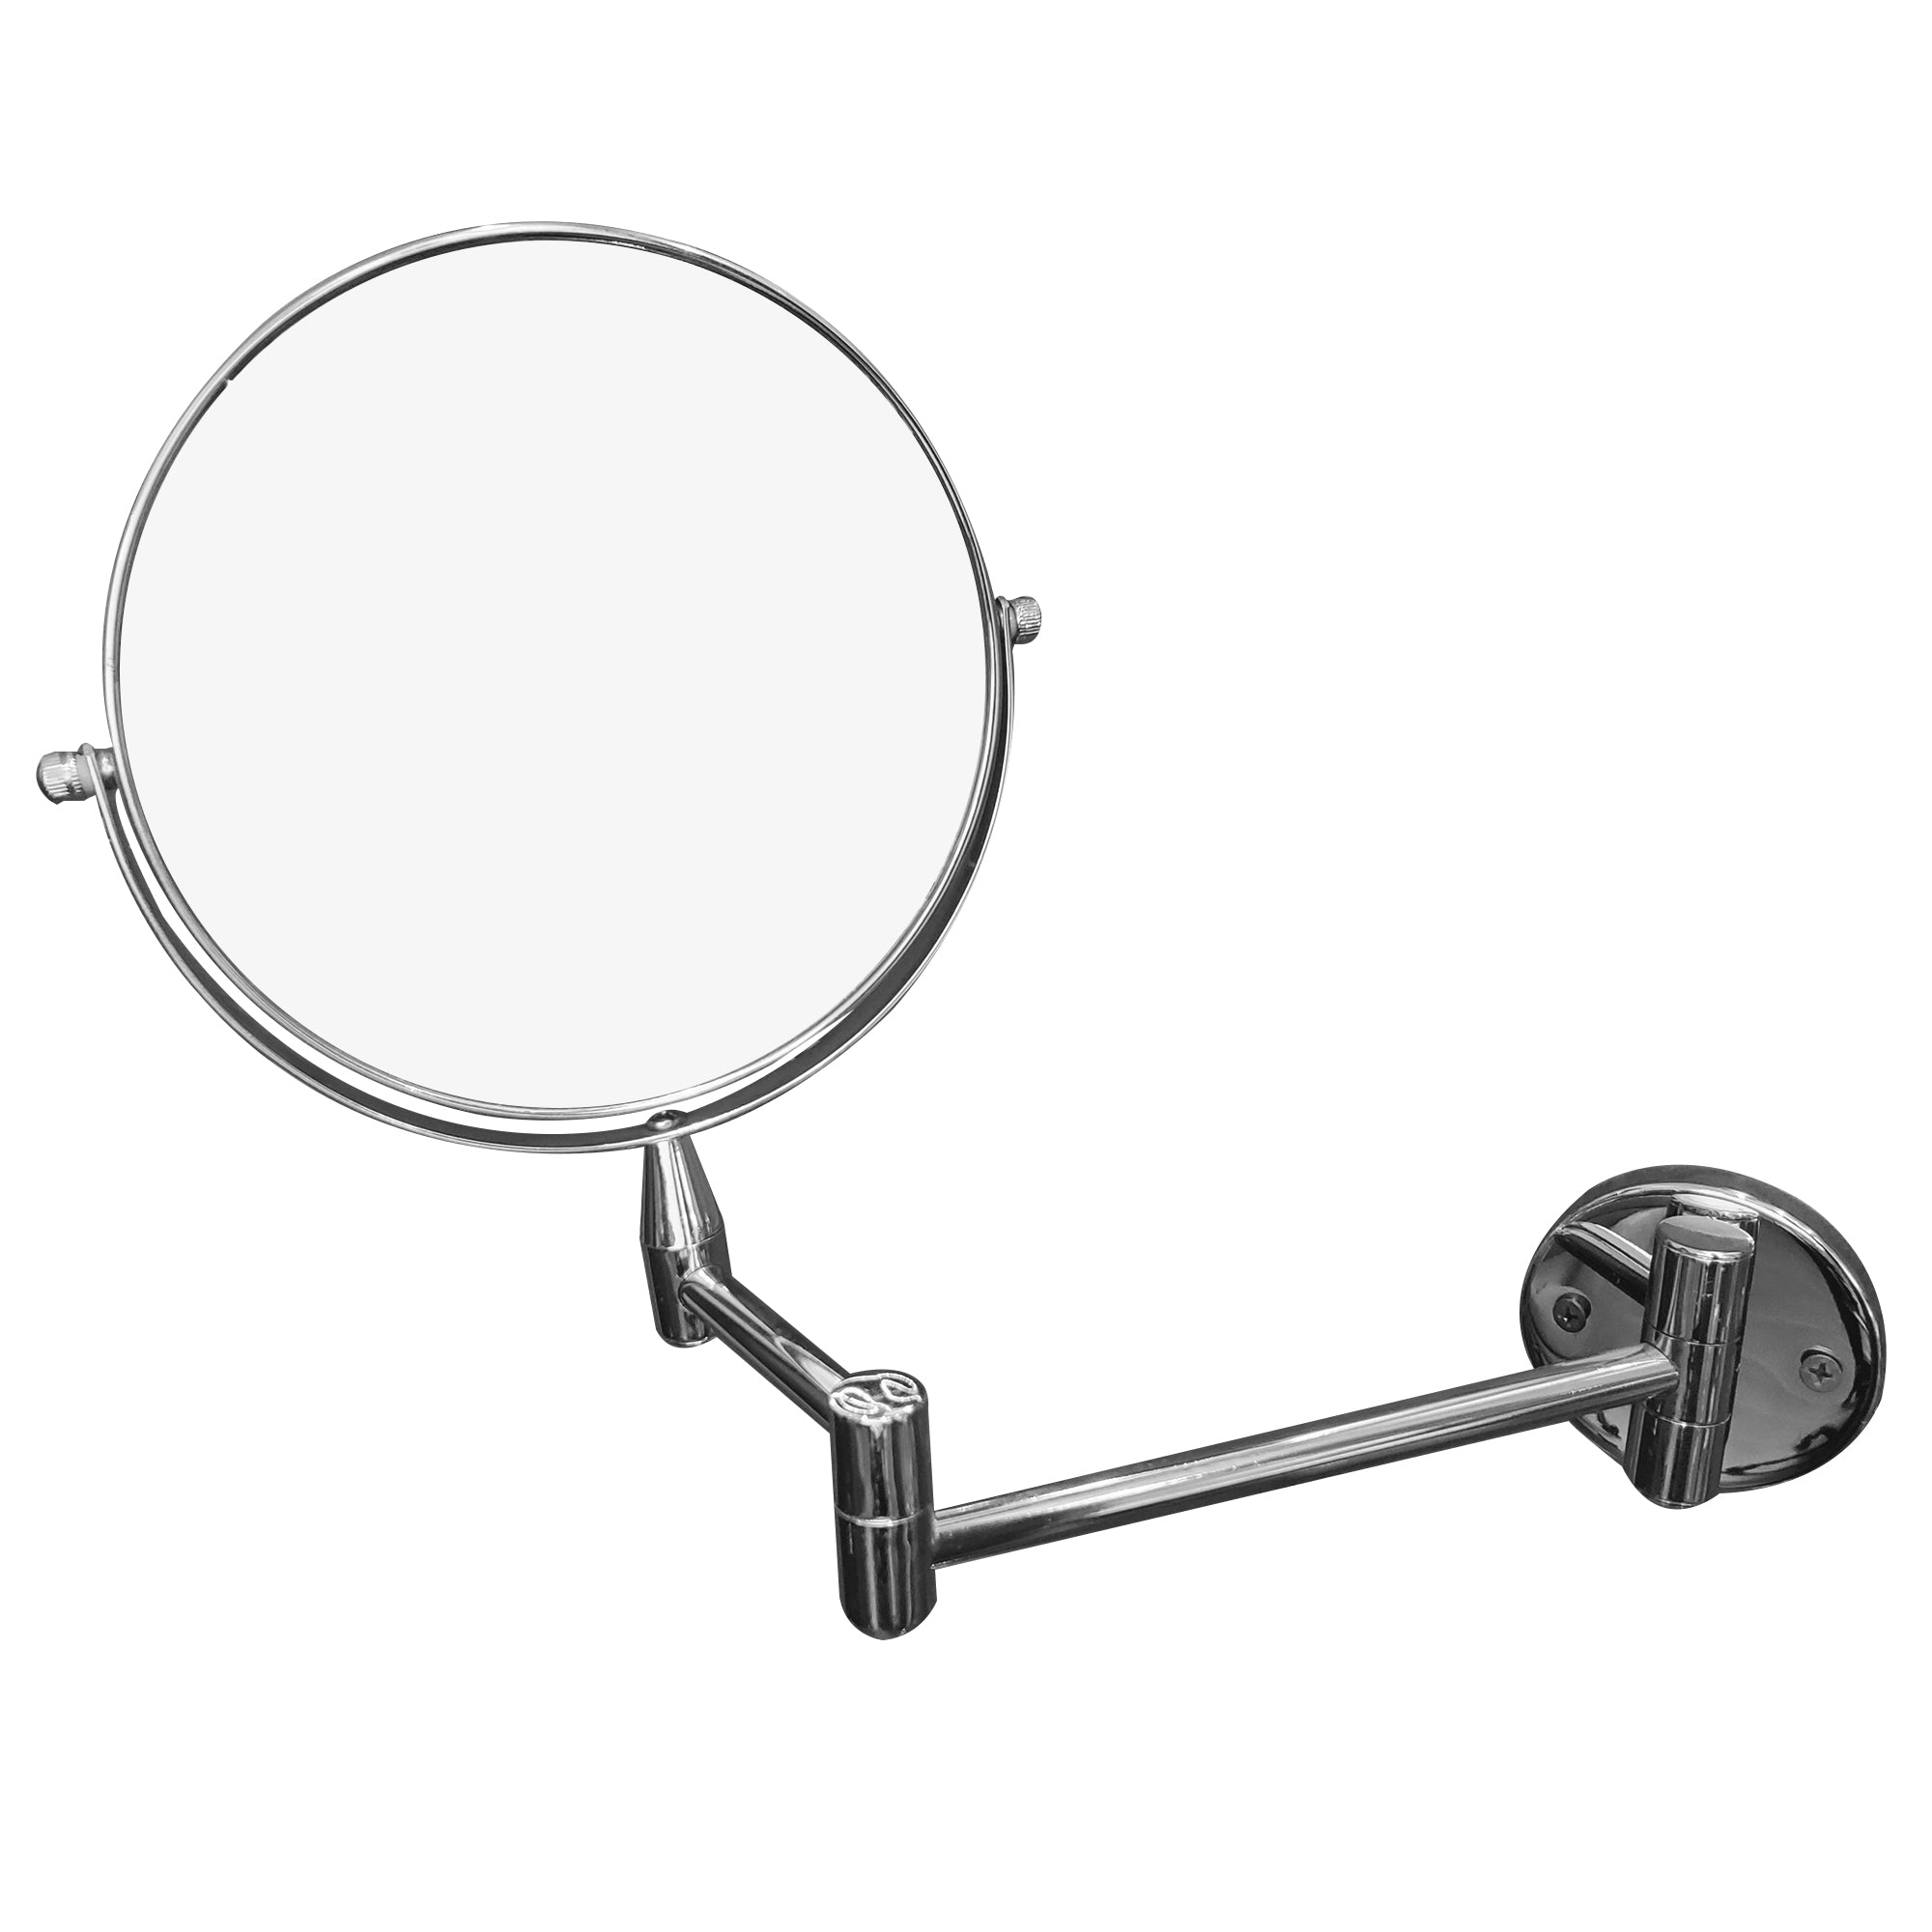 Extendable Swivel Arm Wall Mounted Mirror, 7X Magnification Chrome Finish (M880)